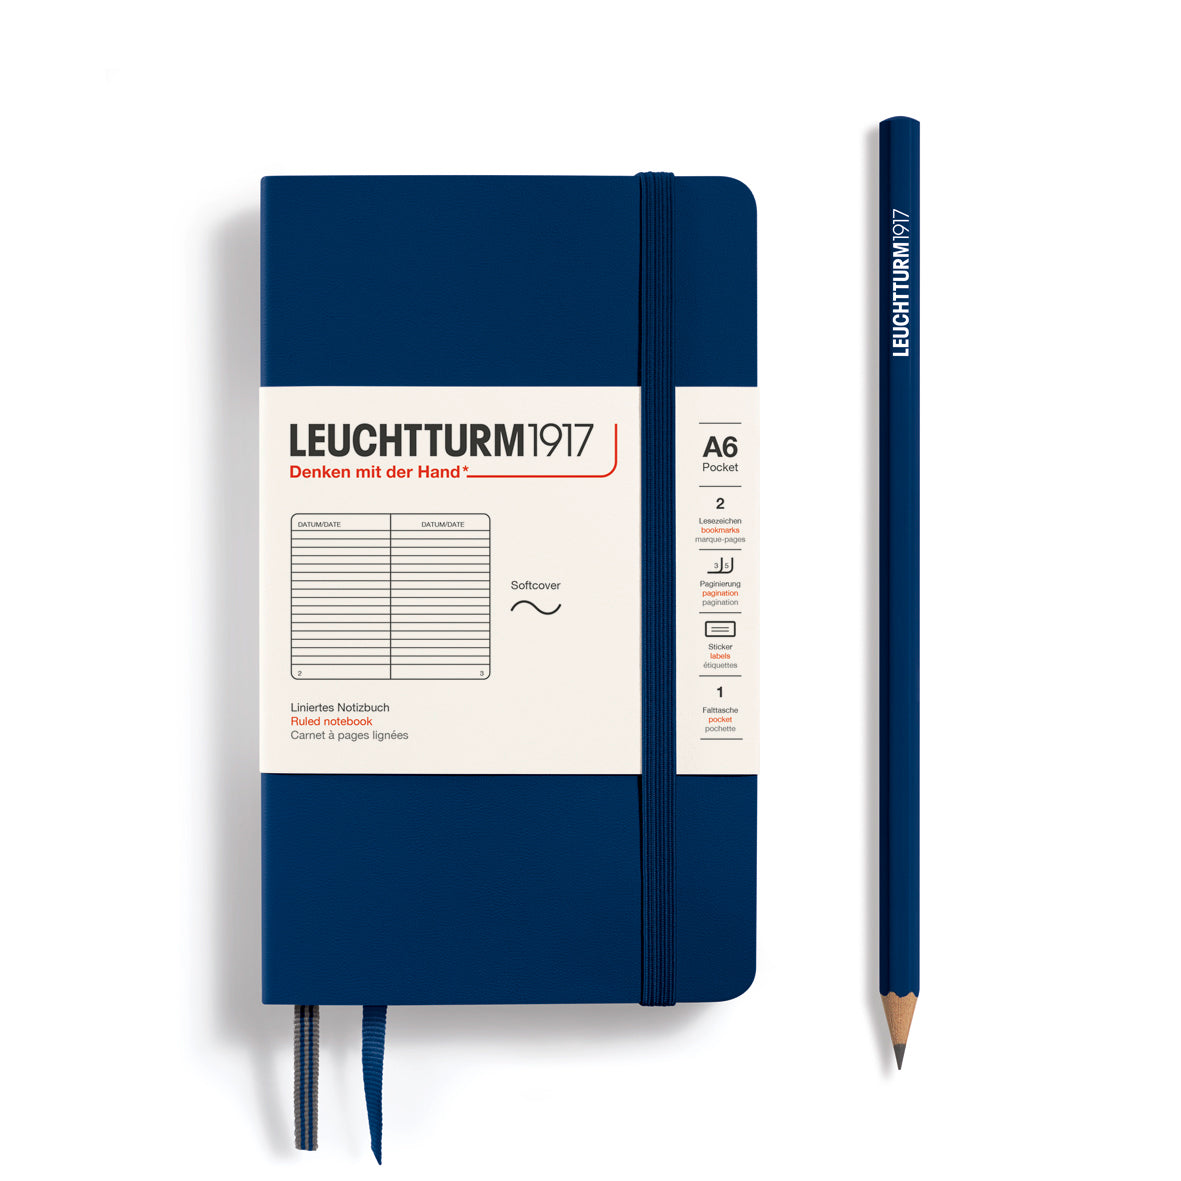 LEUCHTTURM1917 Notebook A6 Pocket Softcover in navy blue and ruled inside at Penny Black